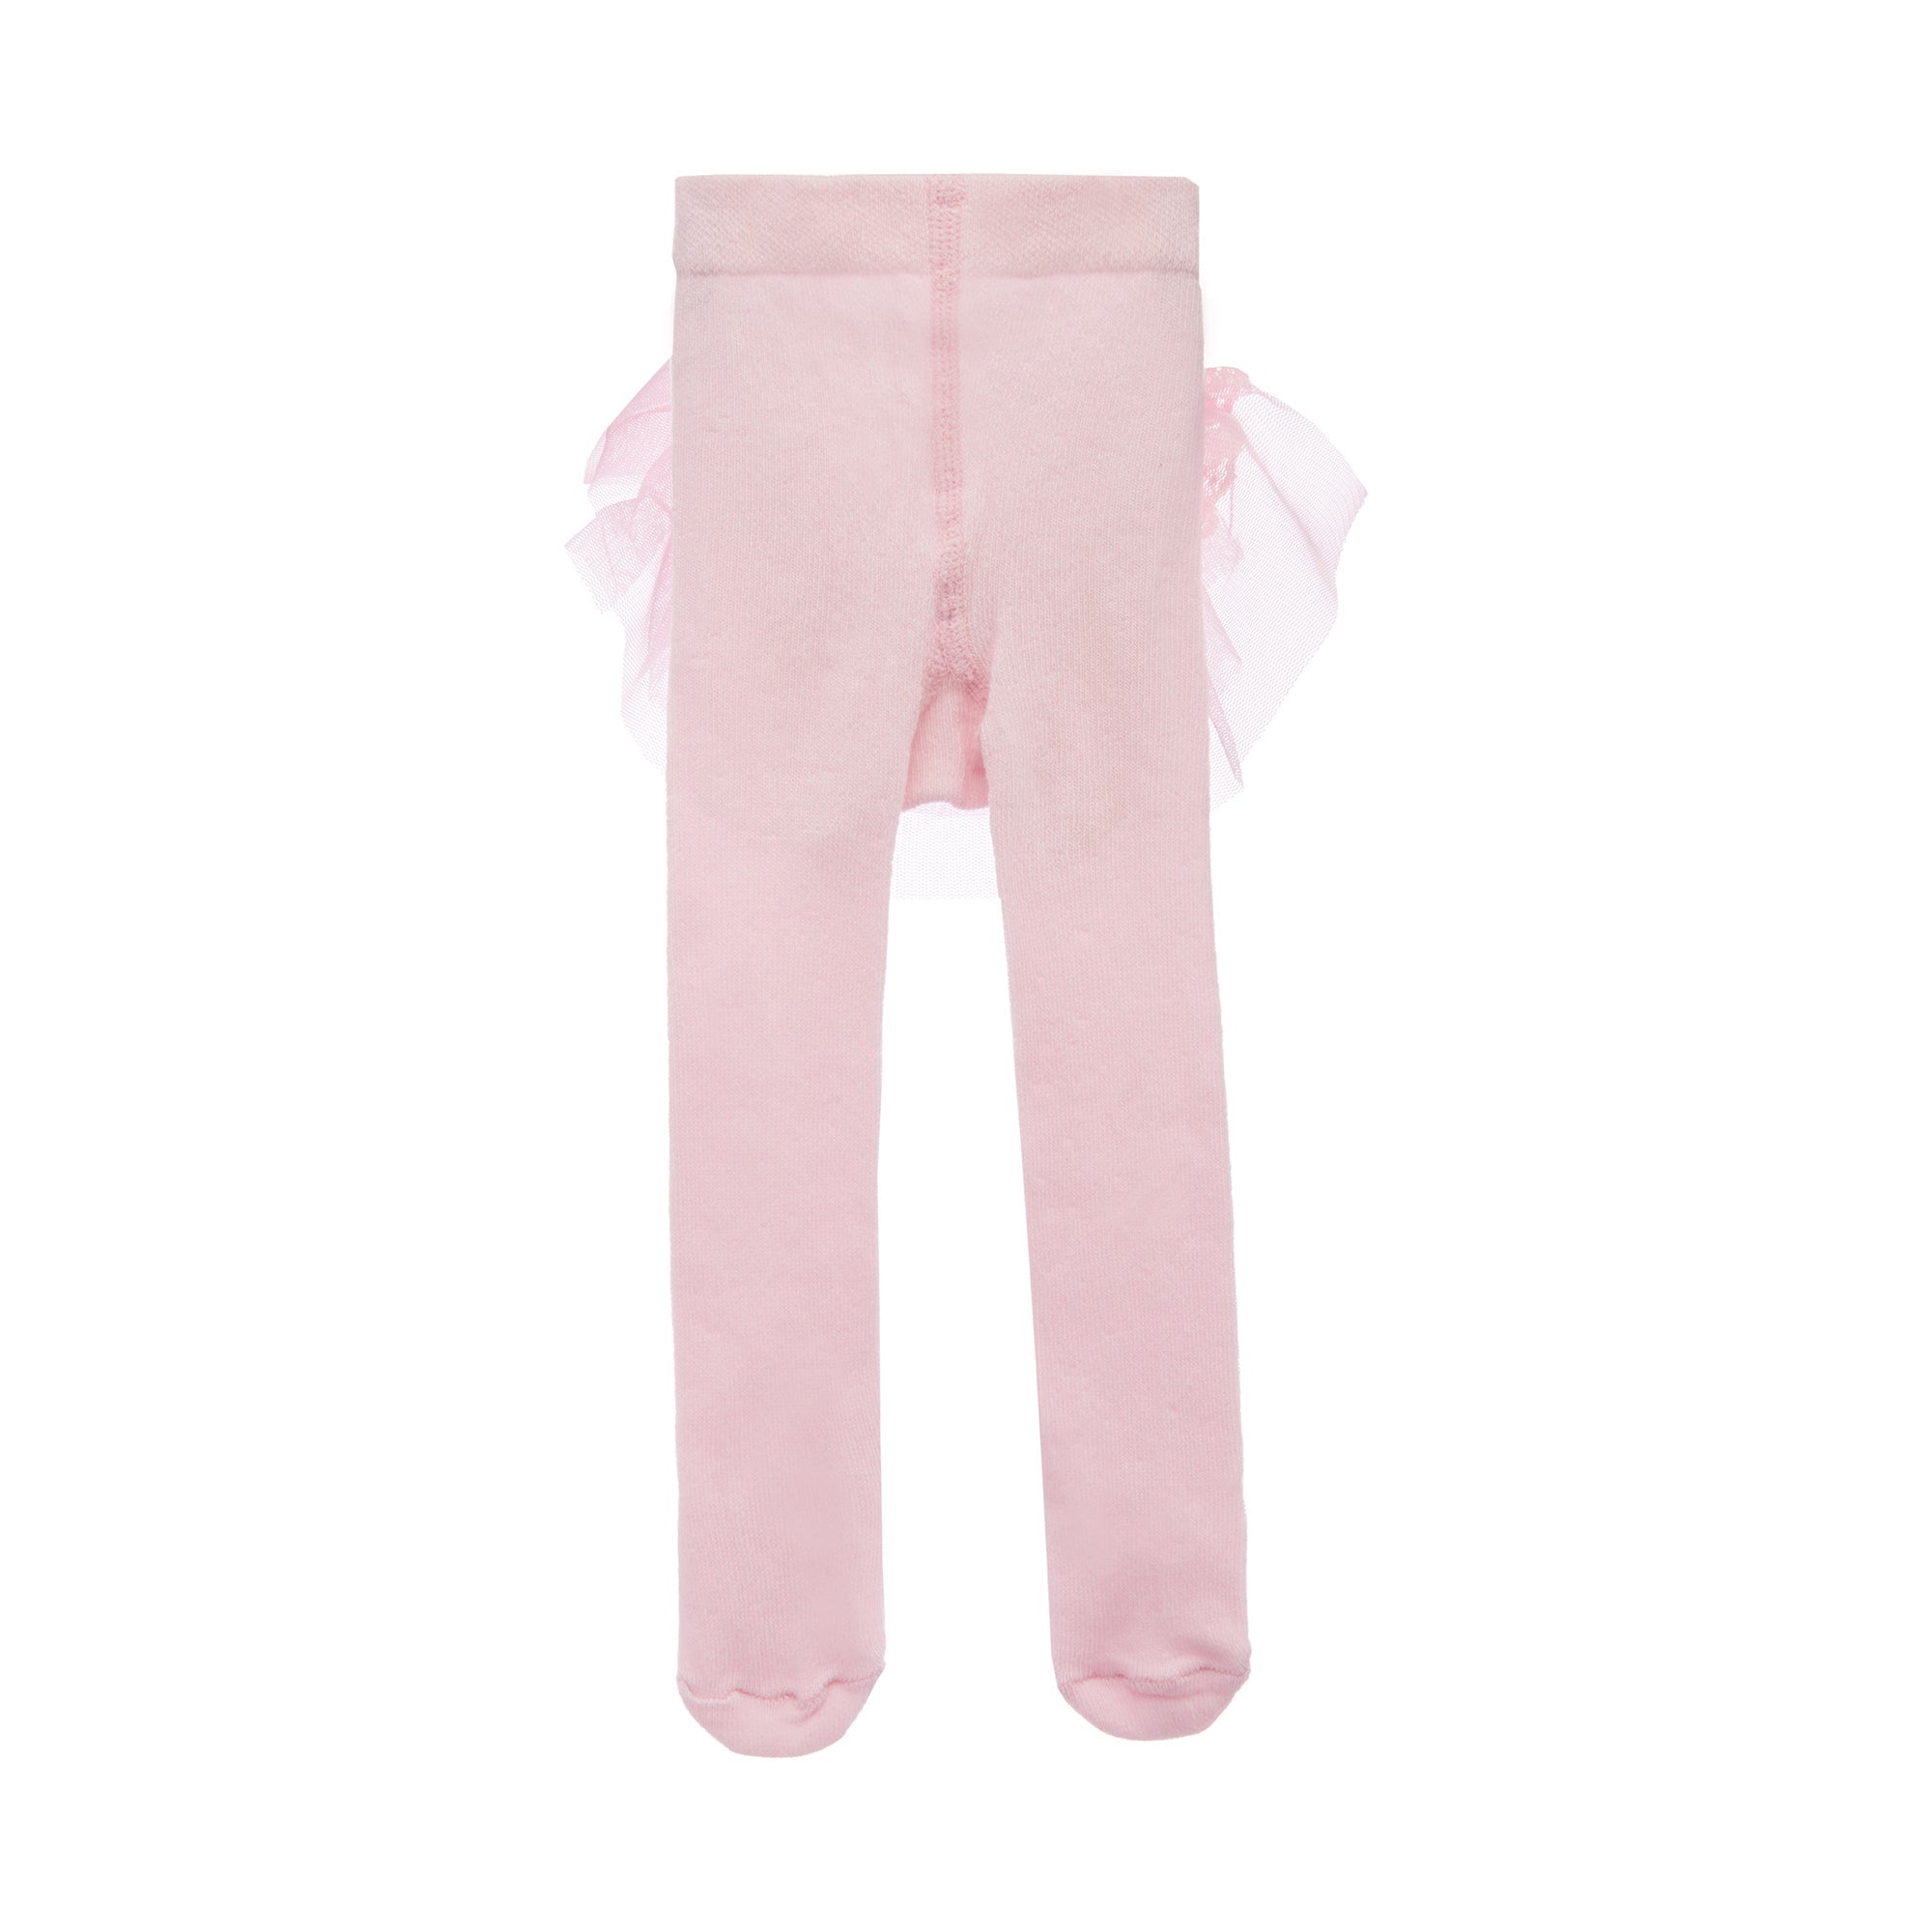 kids-atelier-banblu-baby-girl-pink-tulle-ruffle-tights-75c24p1e-r-pink